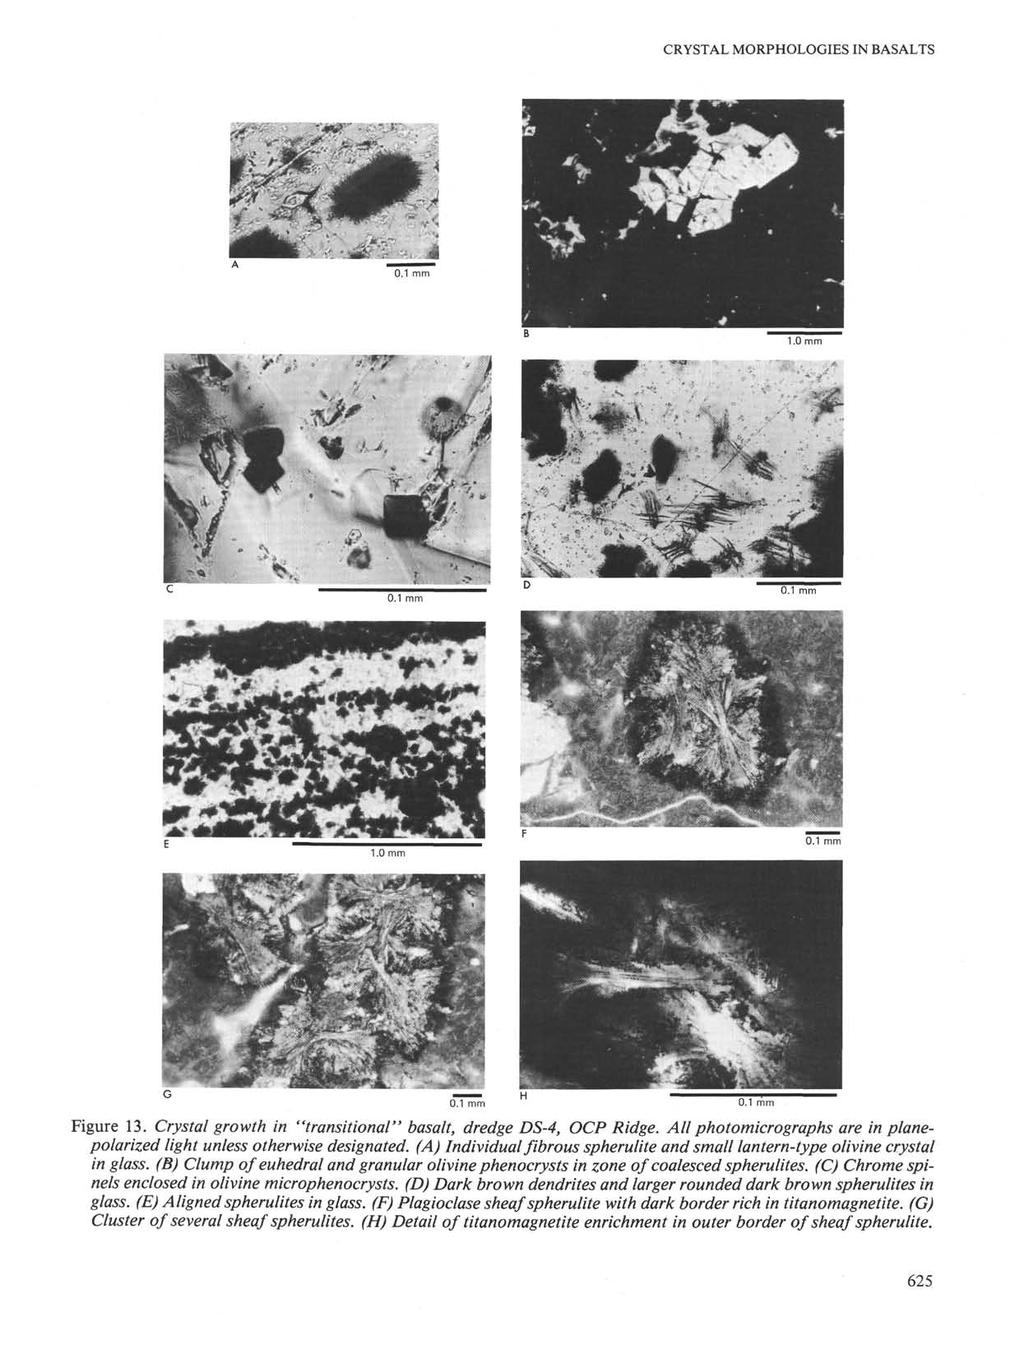 CRYSTAL MORPHOLOGIES IN BASALTS Figure 13. Crystal growth in "transitional" basalt, dredge DS-4, OCP Ridge. All photomicrographs are in planepolarized light unless otherwise designated.